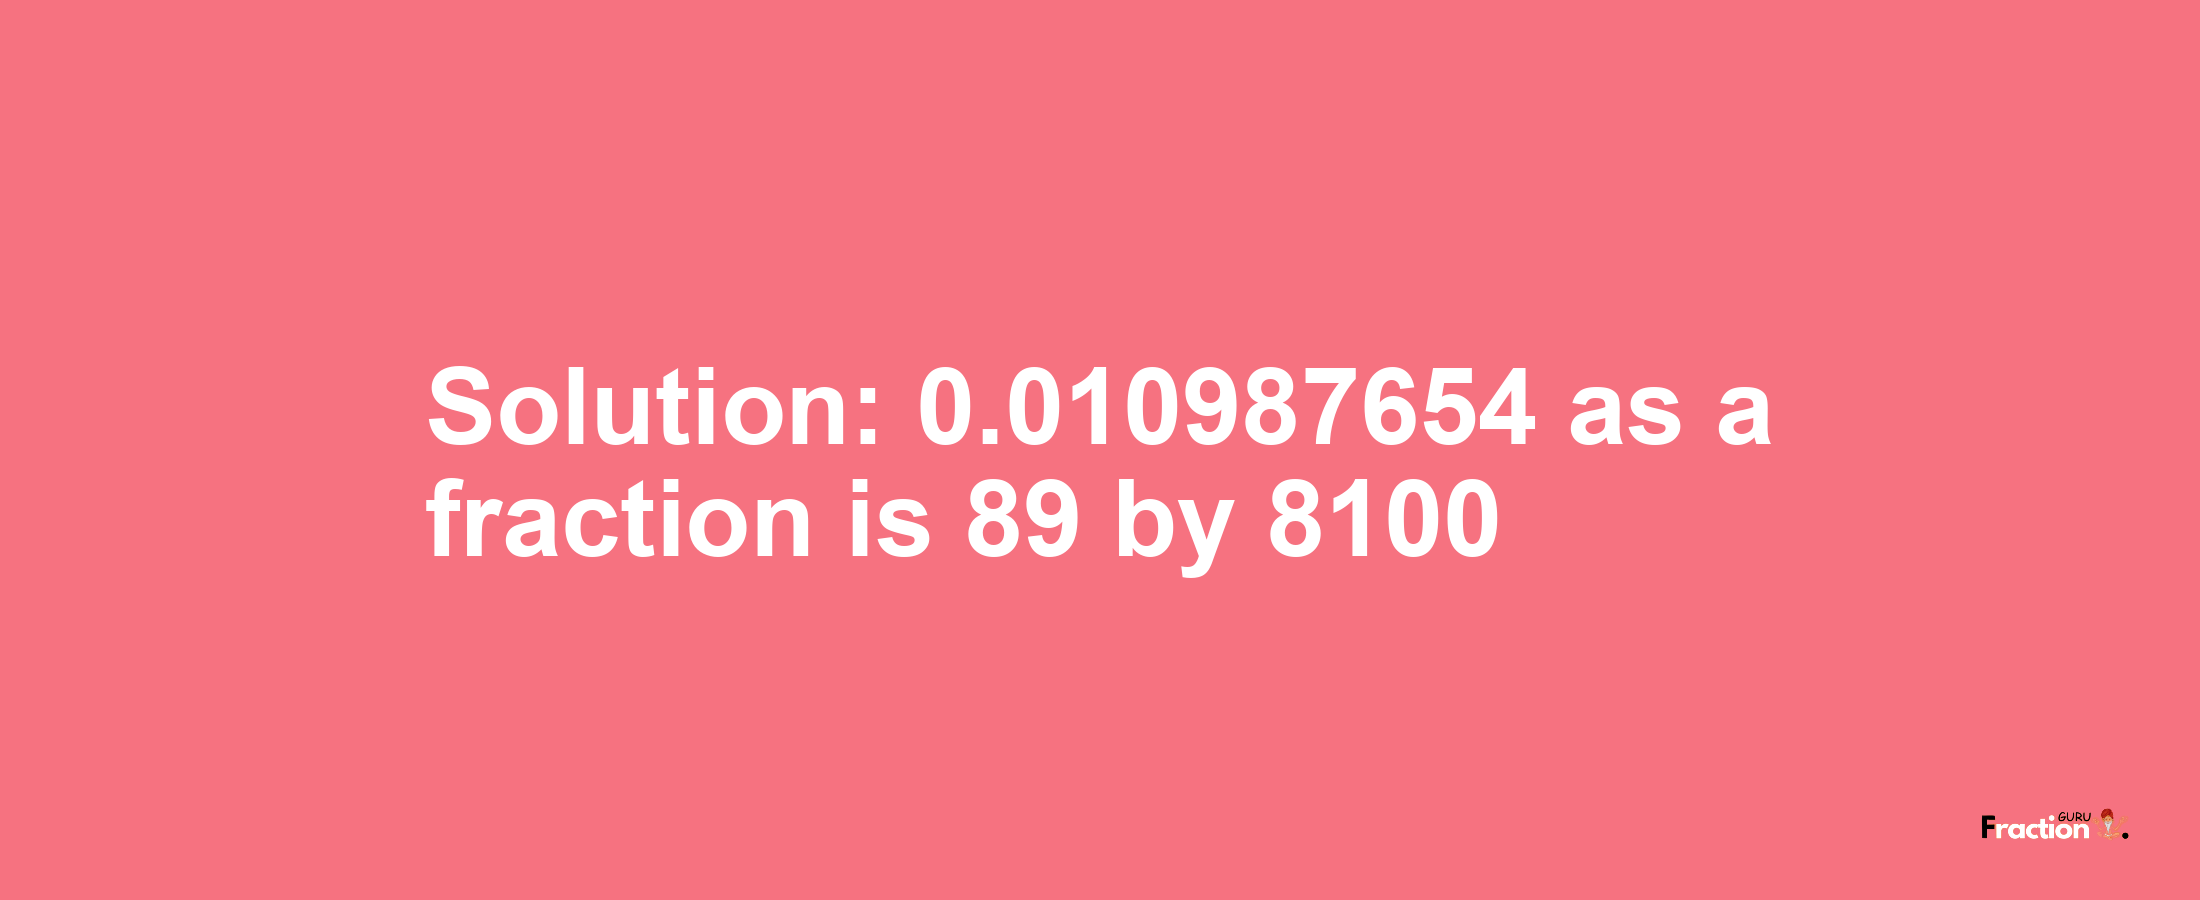 Solution:0.010987654 as a fraction is 89/8100